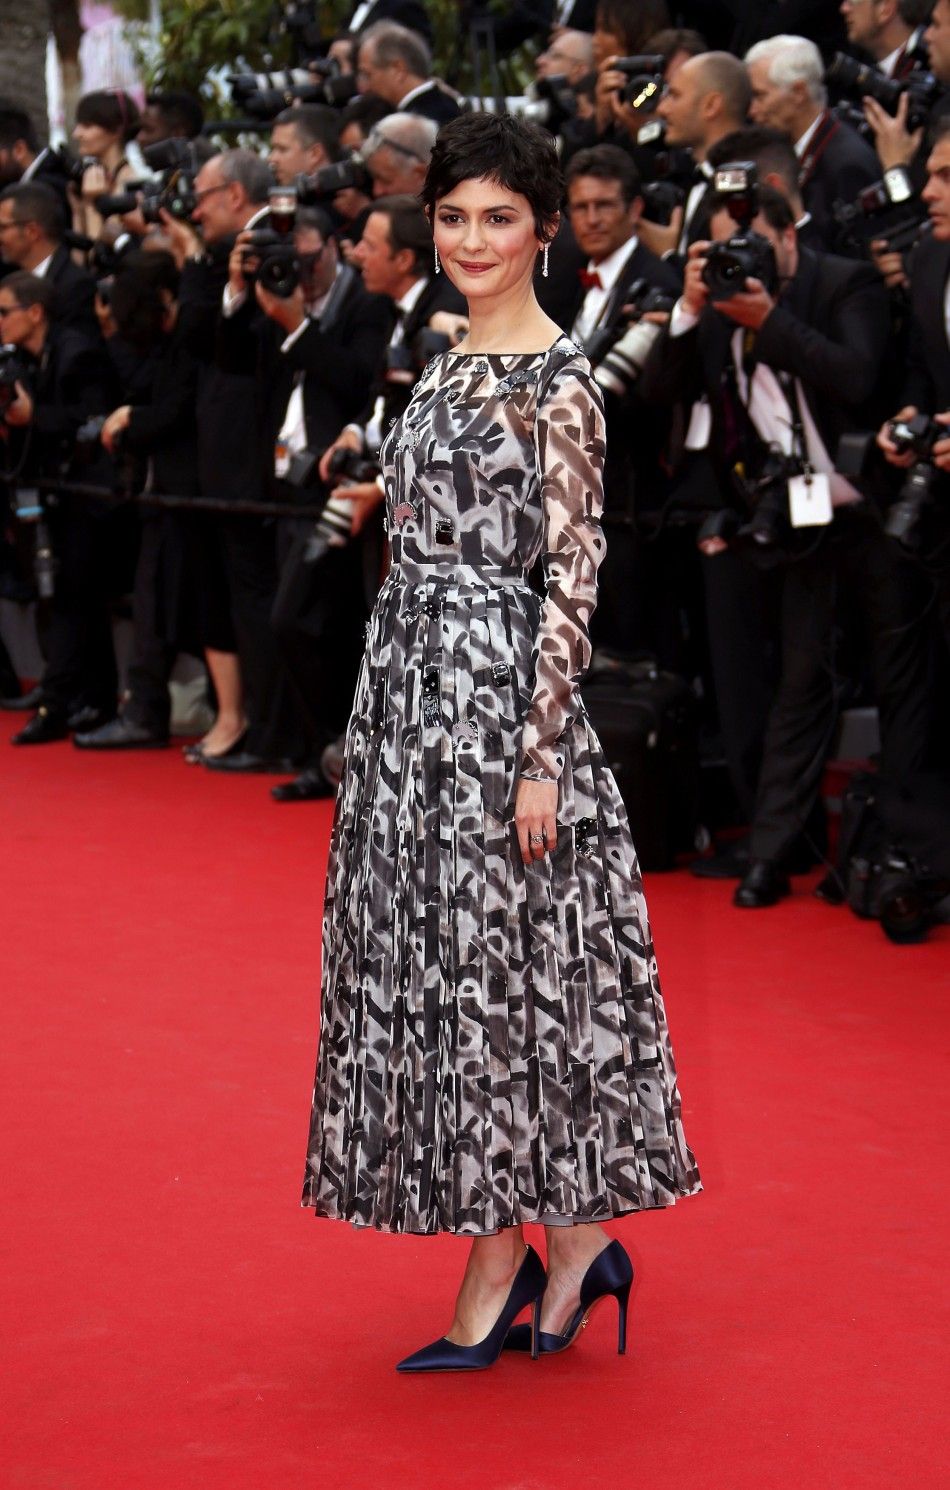 Actress Audrey Tautou poses on the red carpet as she arrives for the opening ceremony of the 67th Cannes Film Festival in Cannes